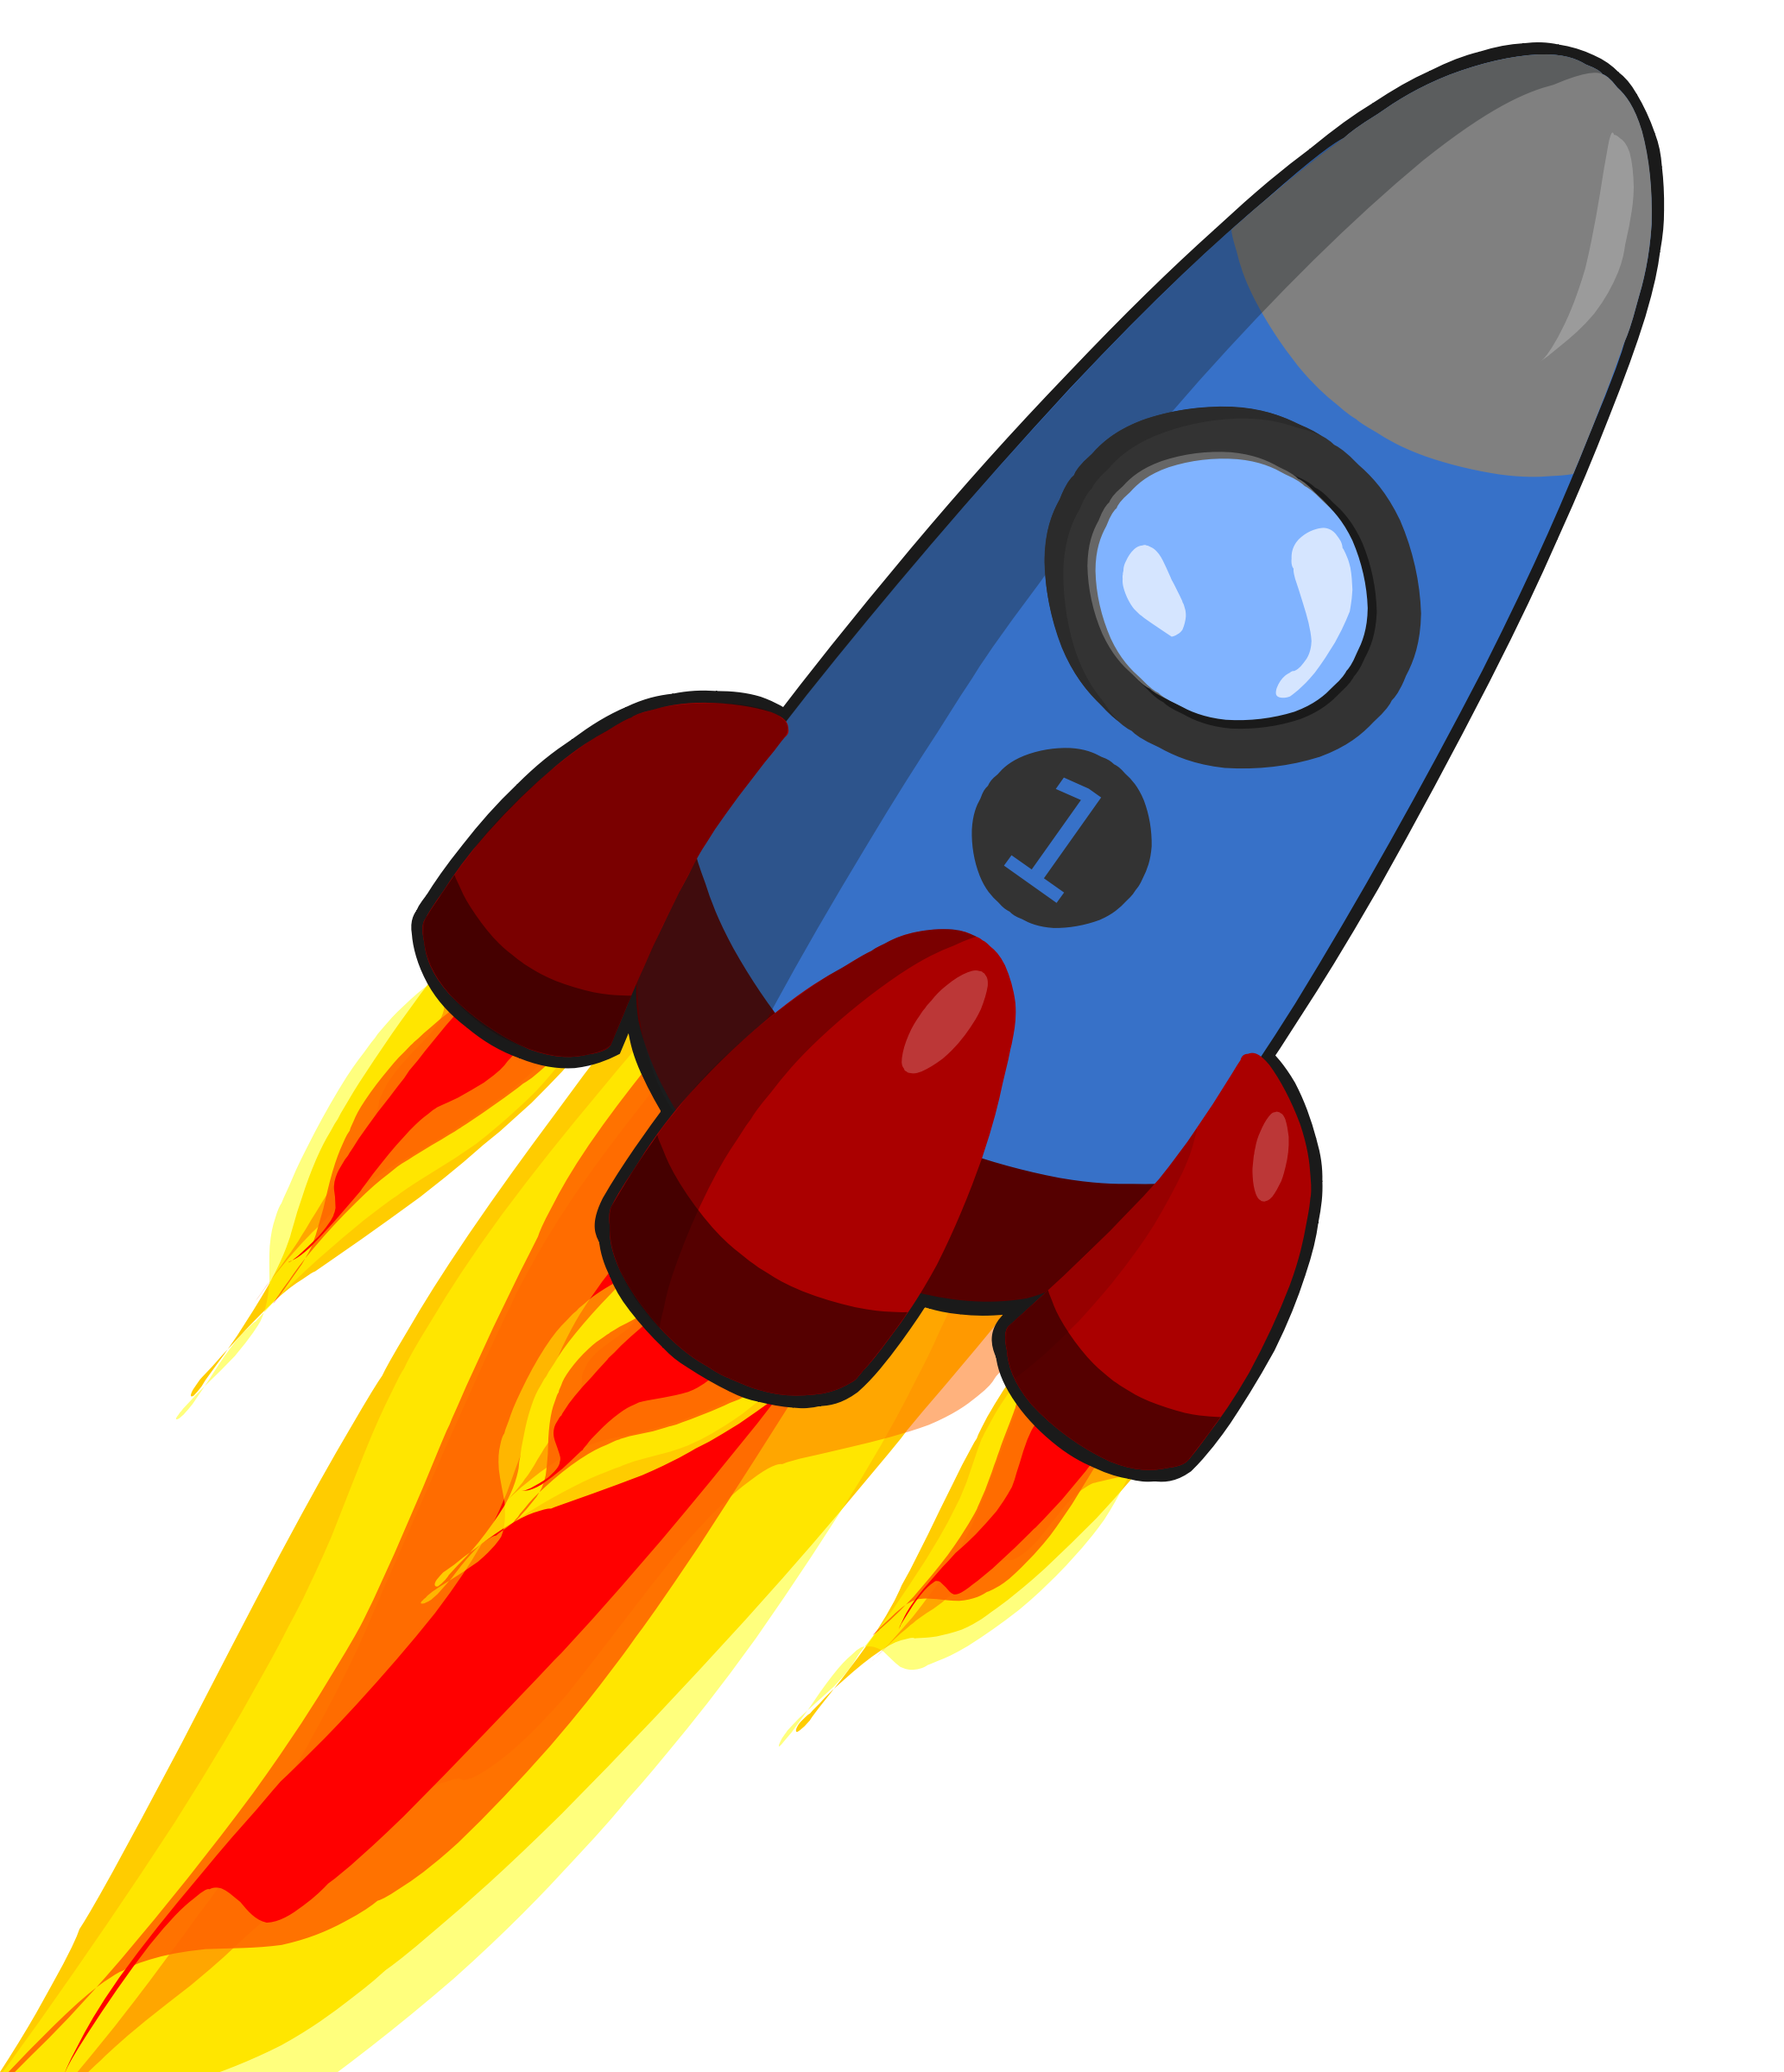 Spaceship clipart red, Spaceship red Transparent FREE for